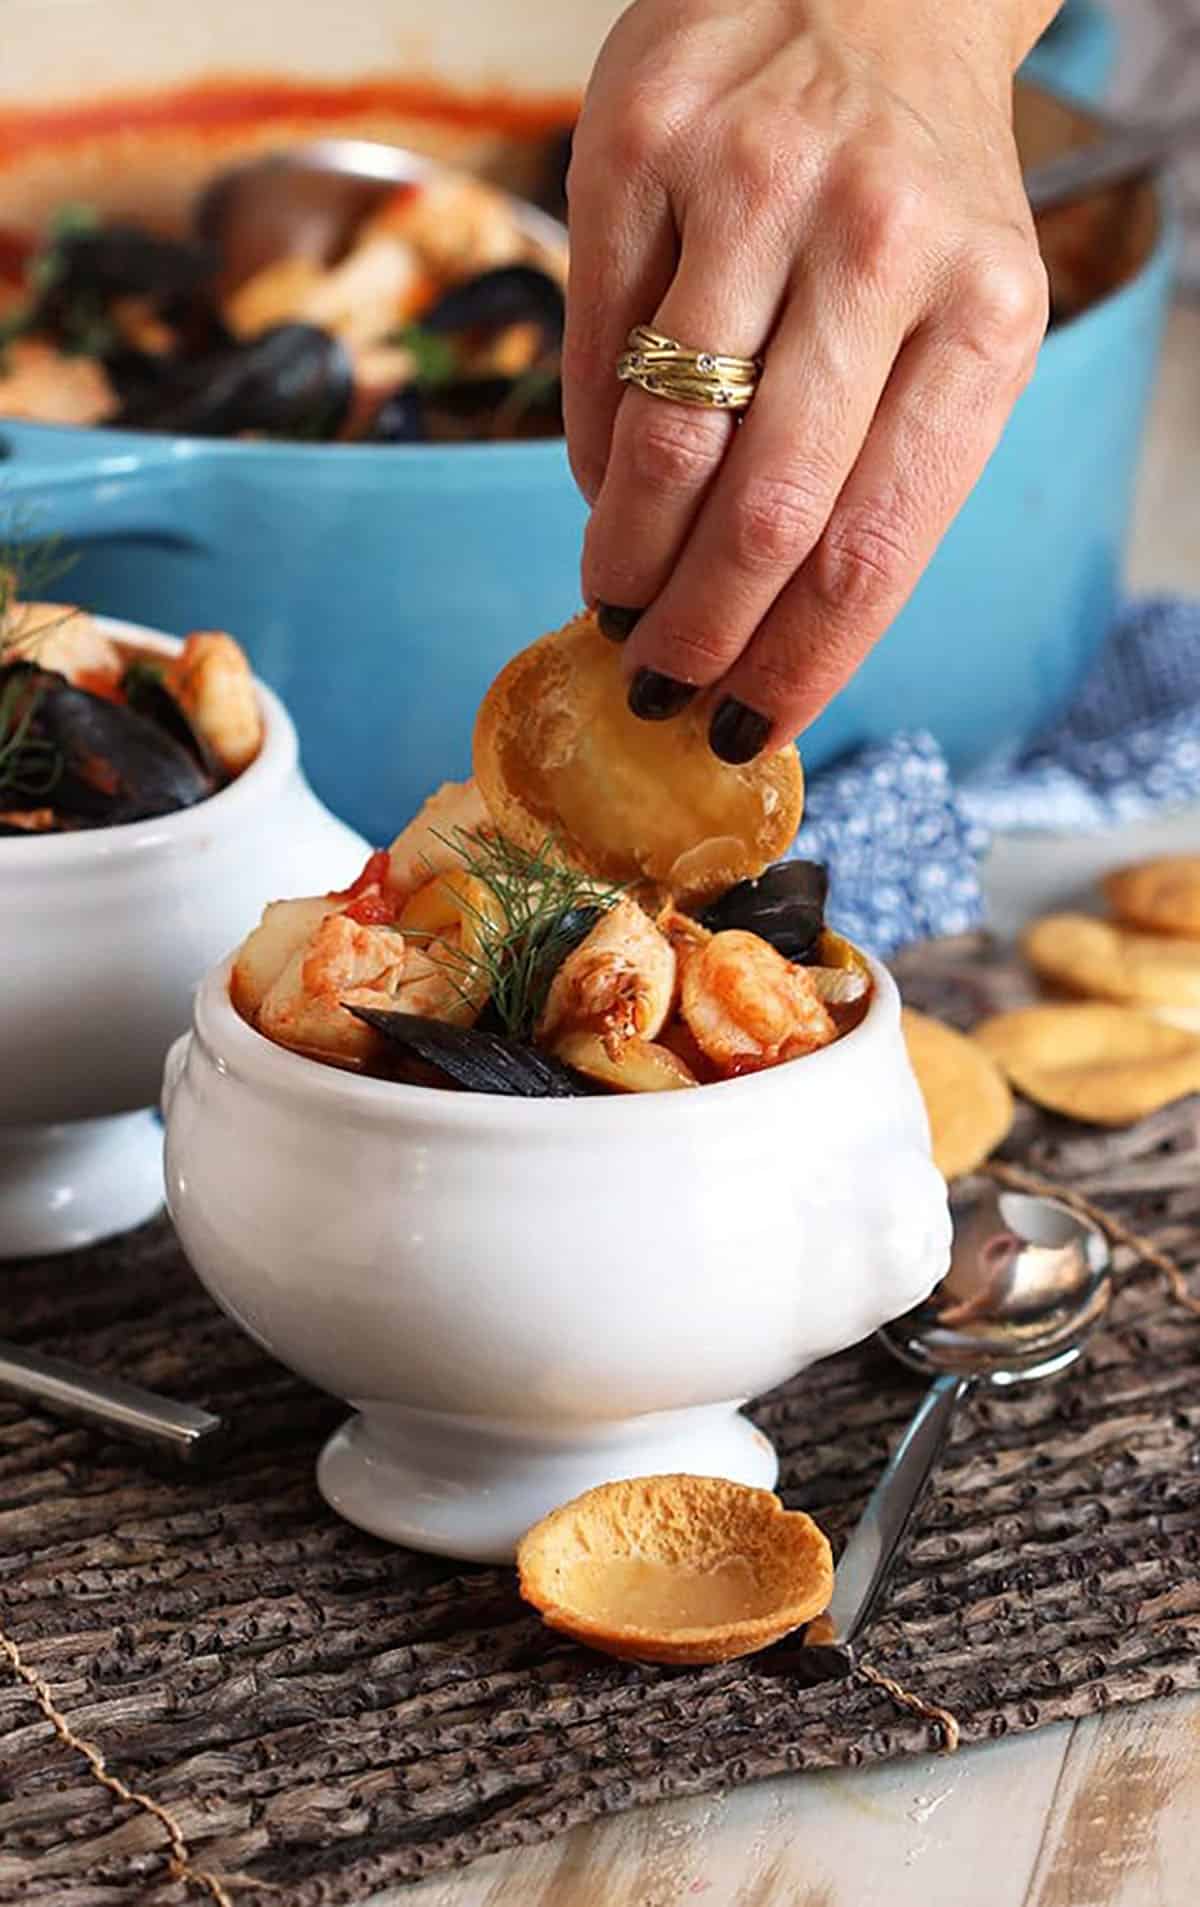 Hand dipping a chip in a bowl of bouillabaisse.